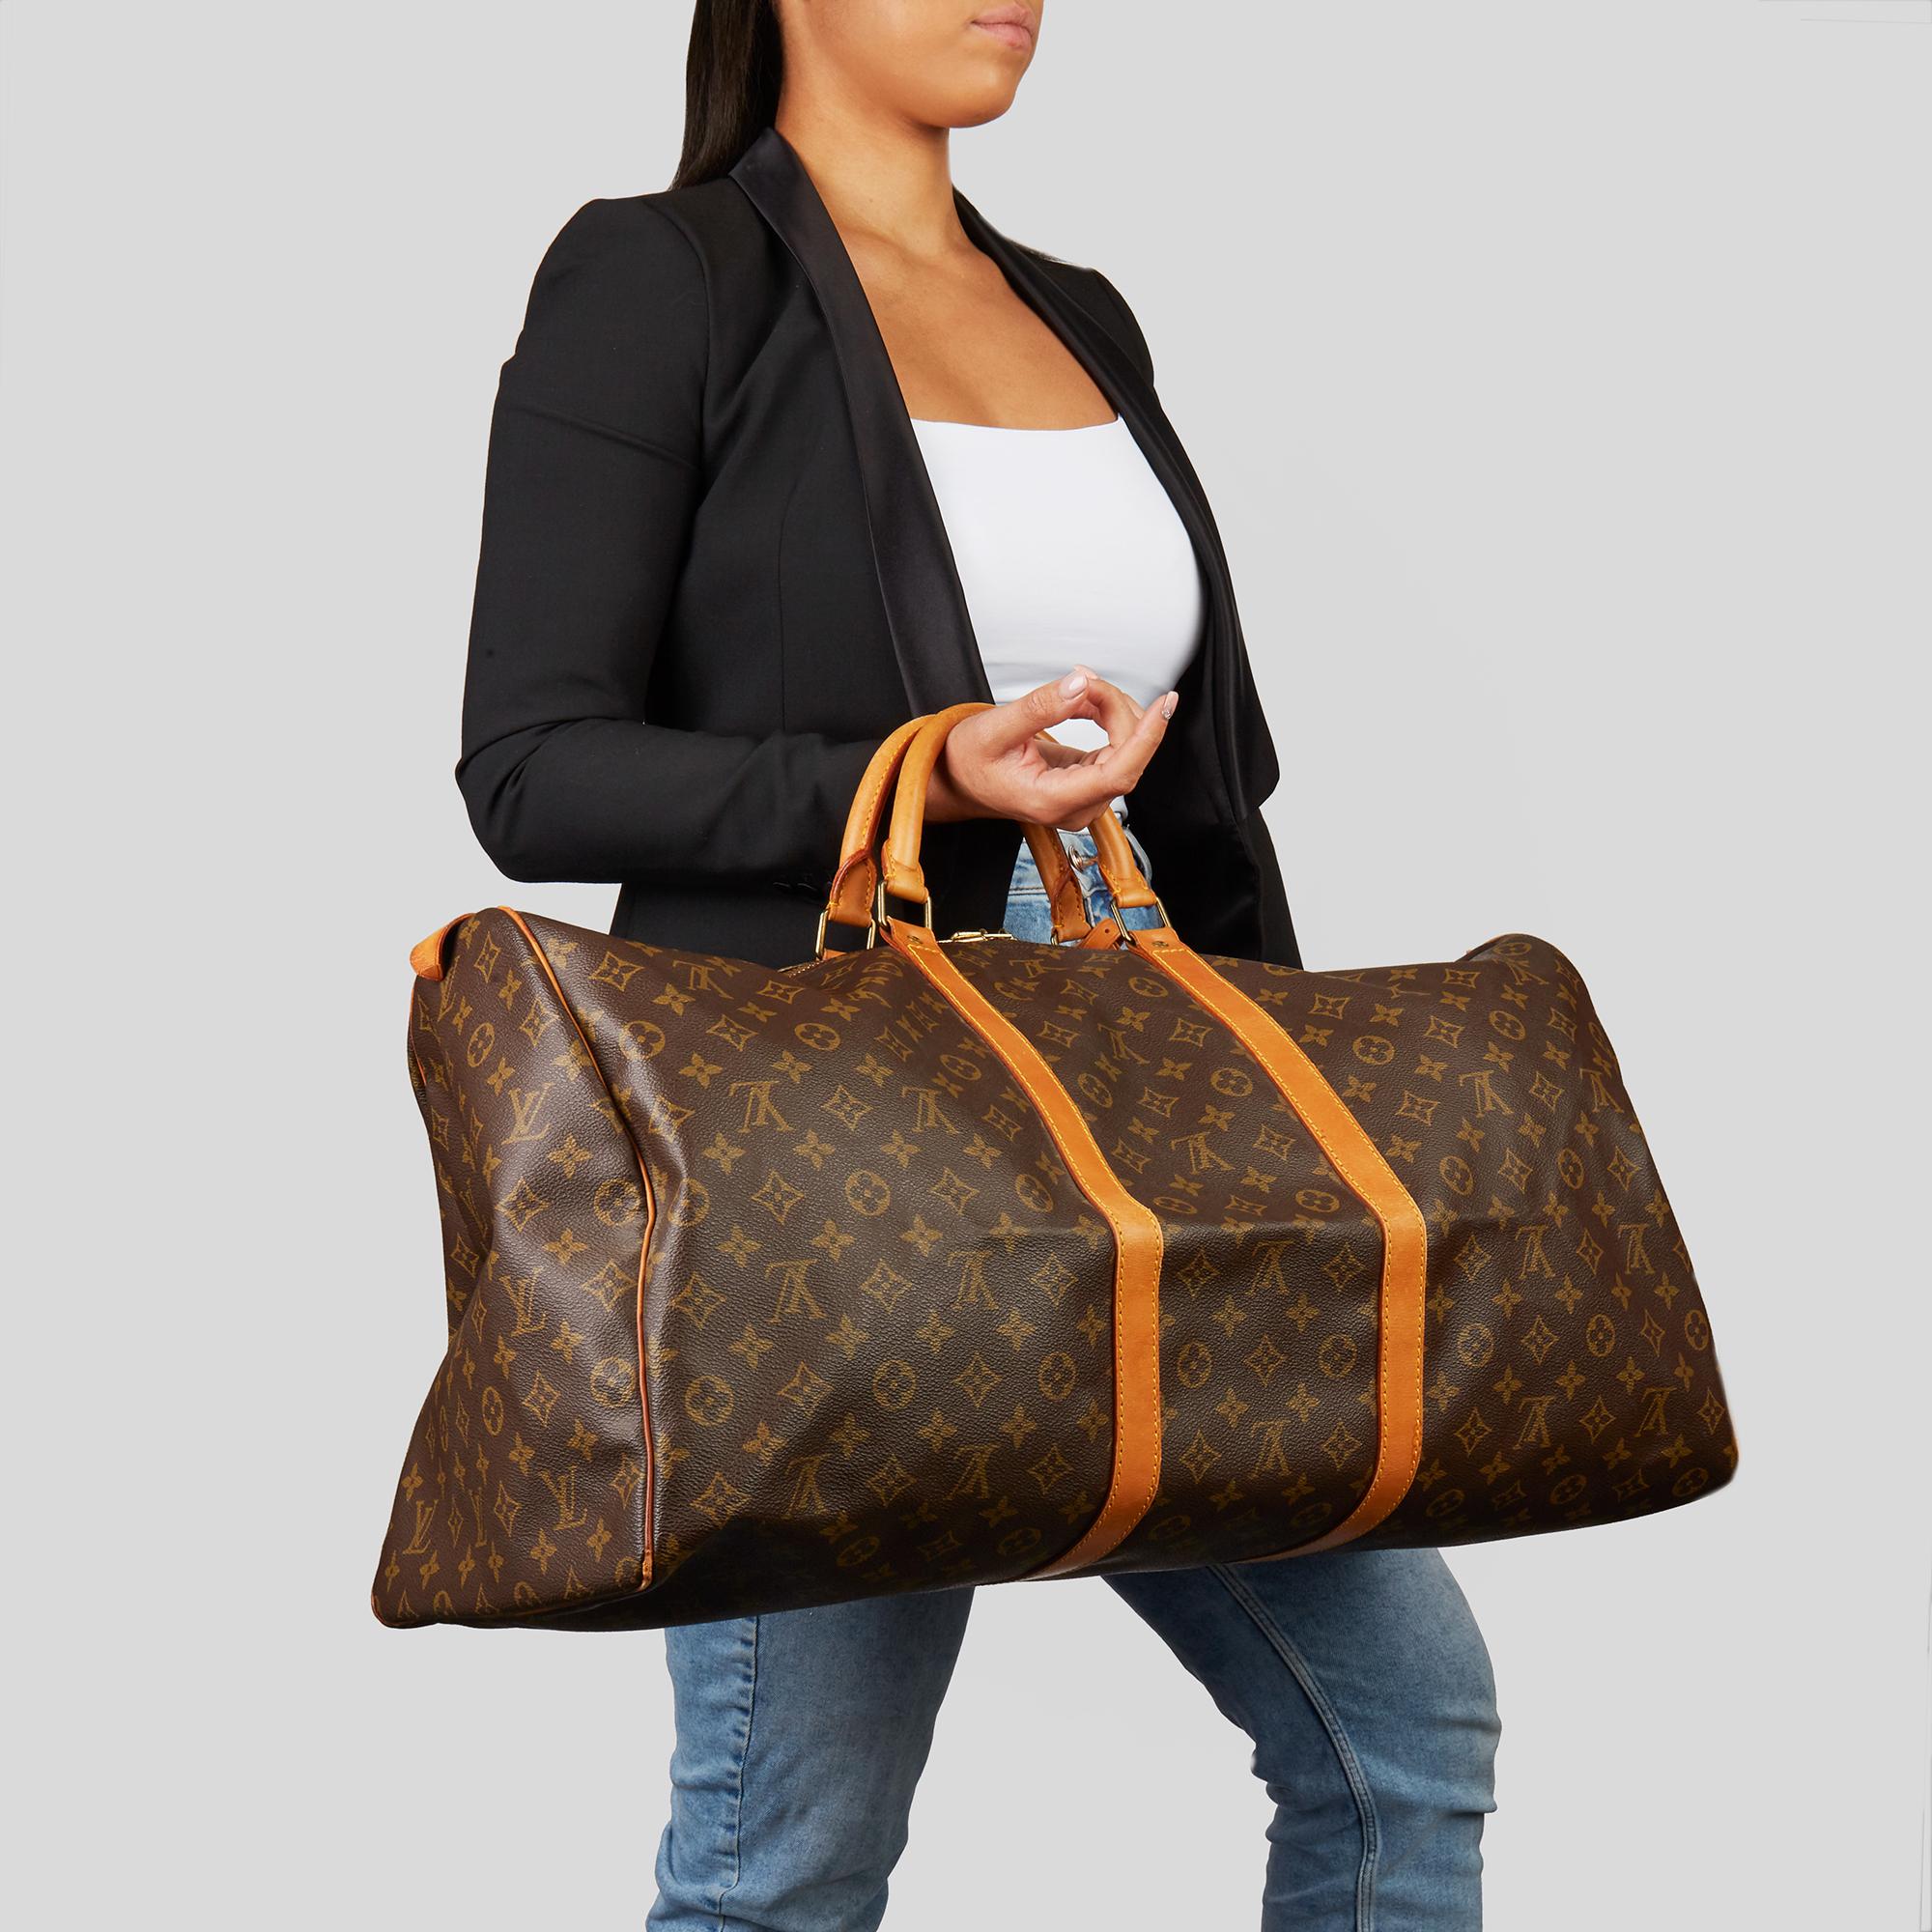 LOUIS VUITTON
Brown Monogram Coated Canvas & Vachetta Leather Vintage Keepall 60

Xupes Reference: HB3490
Serial Number: MI884
Age (Circa): 1988
Accompanied By: Luggage Tag
Authenticity Details: Date Stamp (Made in France) 
Gender: Unisex
Type: